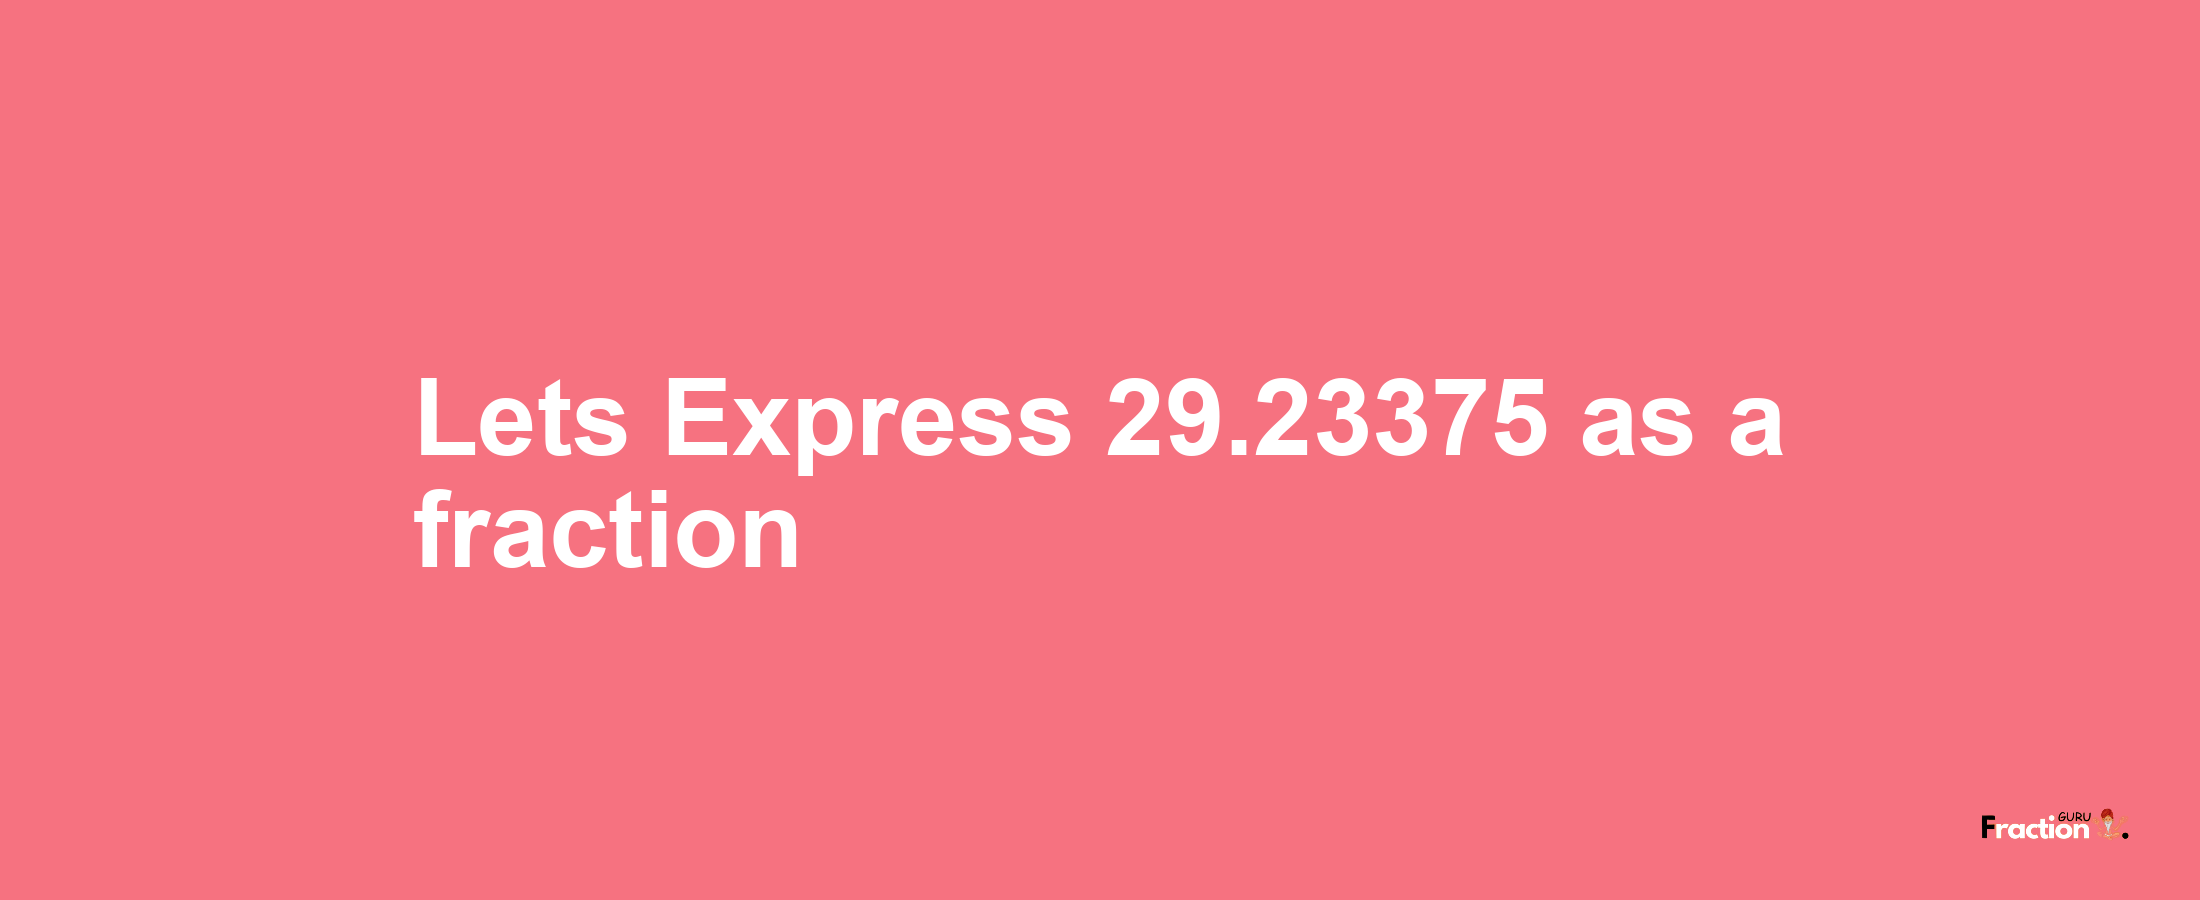 Lets Express 29.23375 as afraction